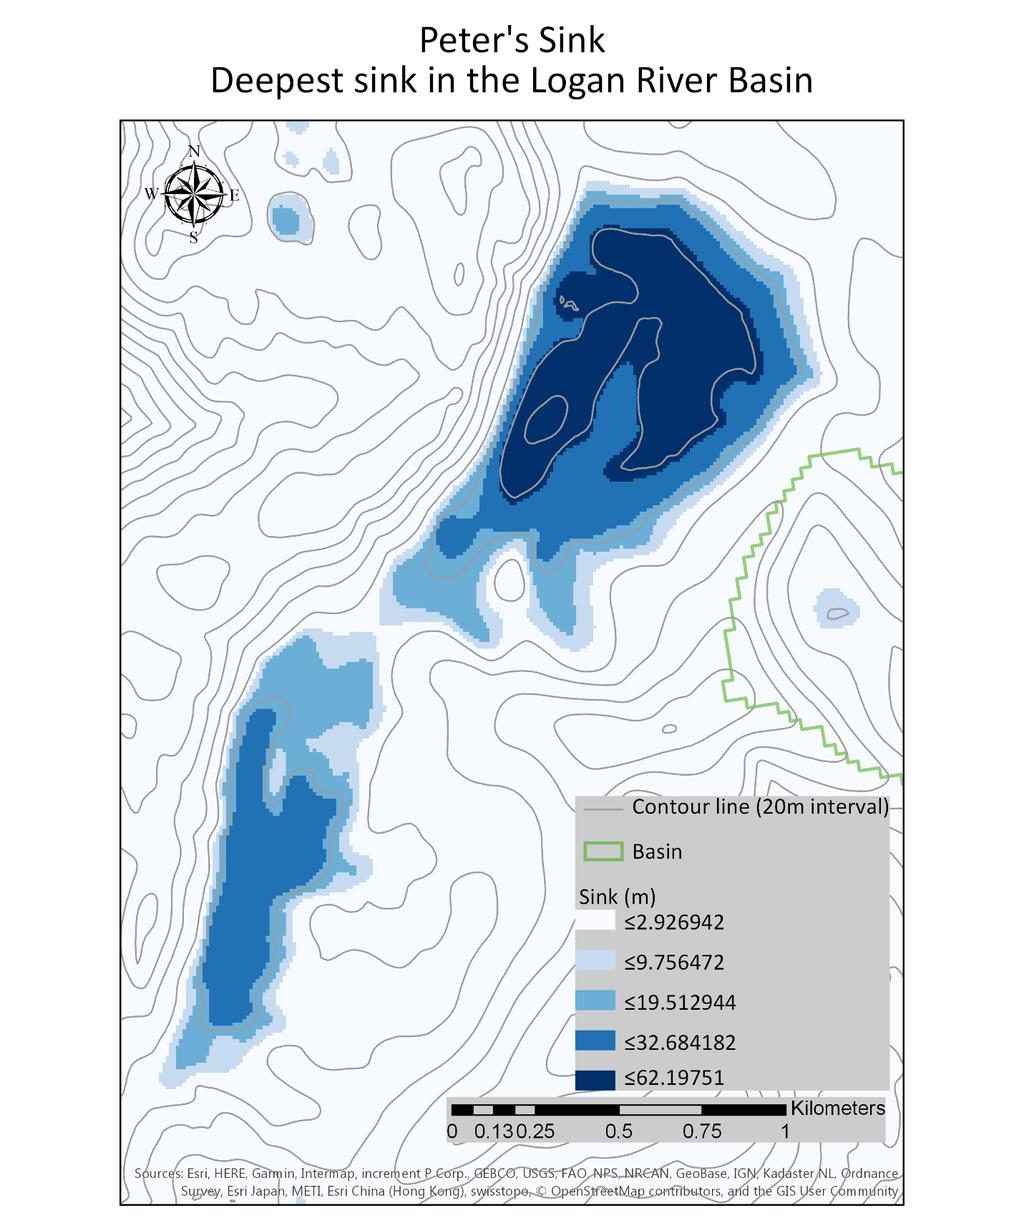 3. A layout showing the deepest sink in the Logan River basin.